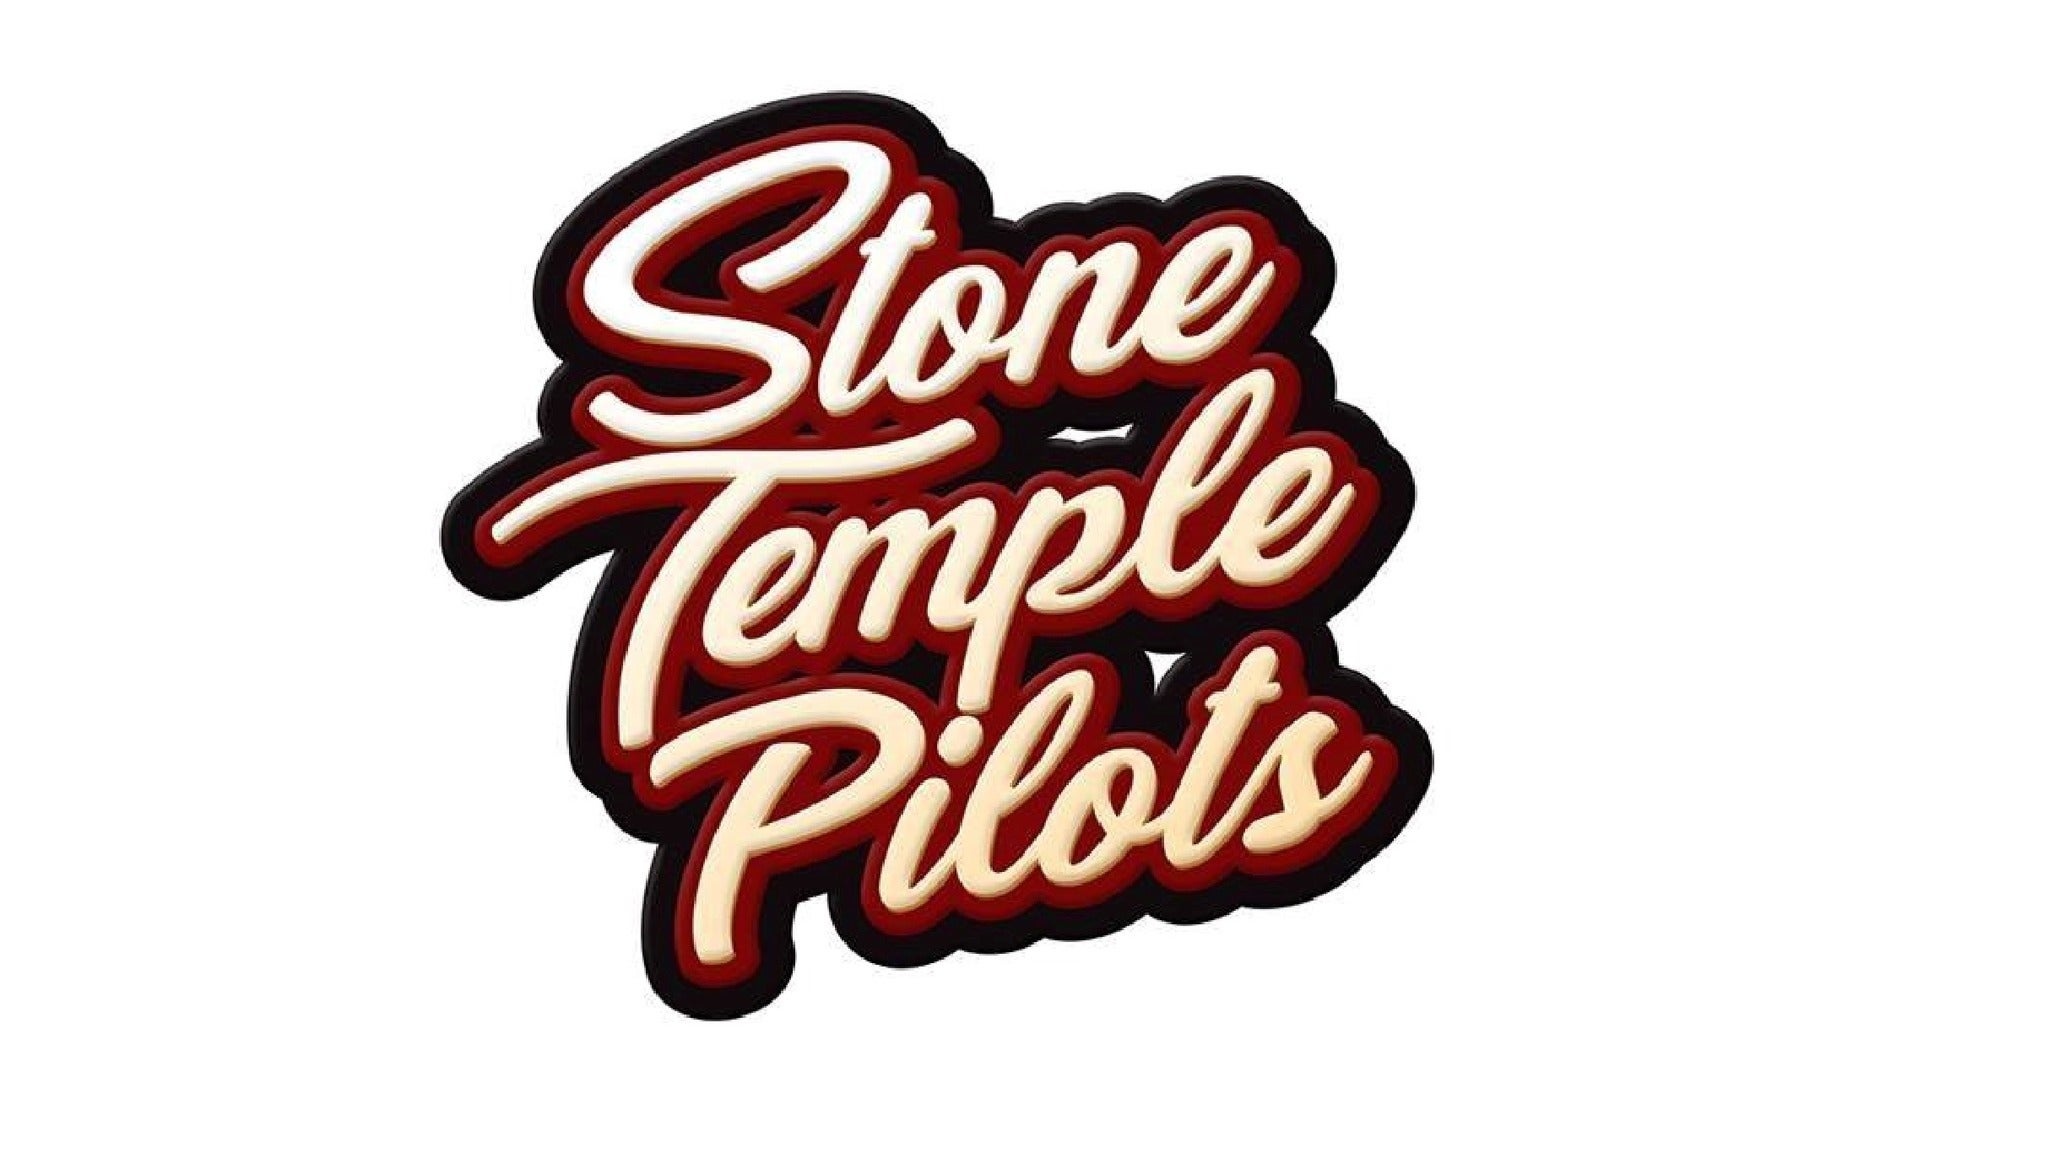 Stone Temple Pilots Wallpapers - Top Free Stone Temple Pilots Backgrounds 2050x1160